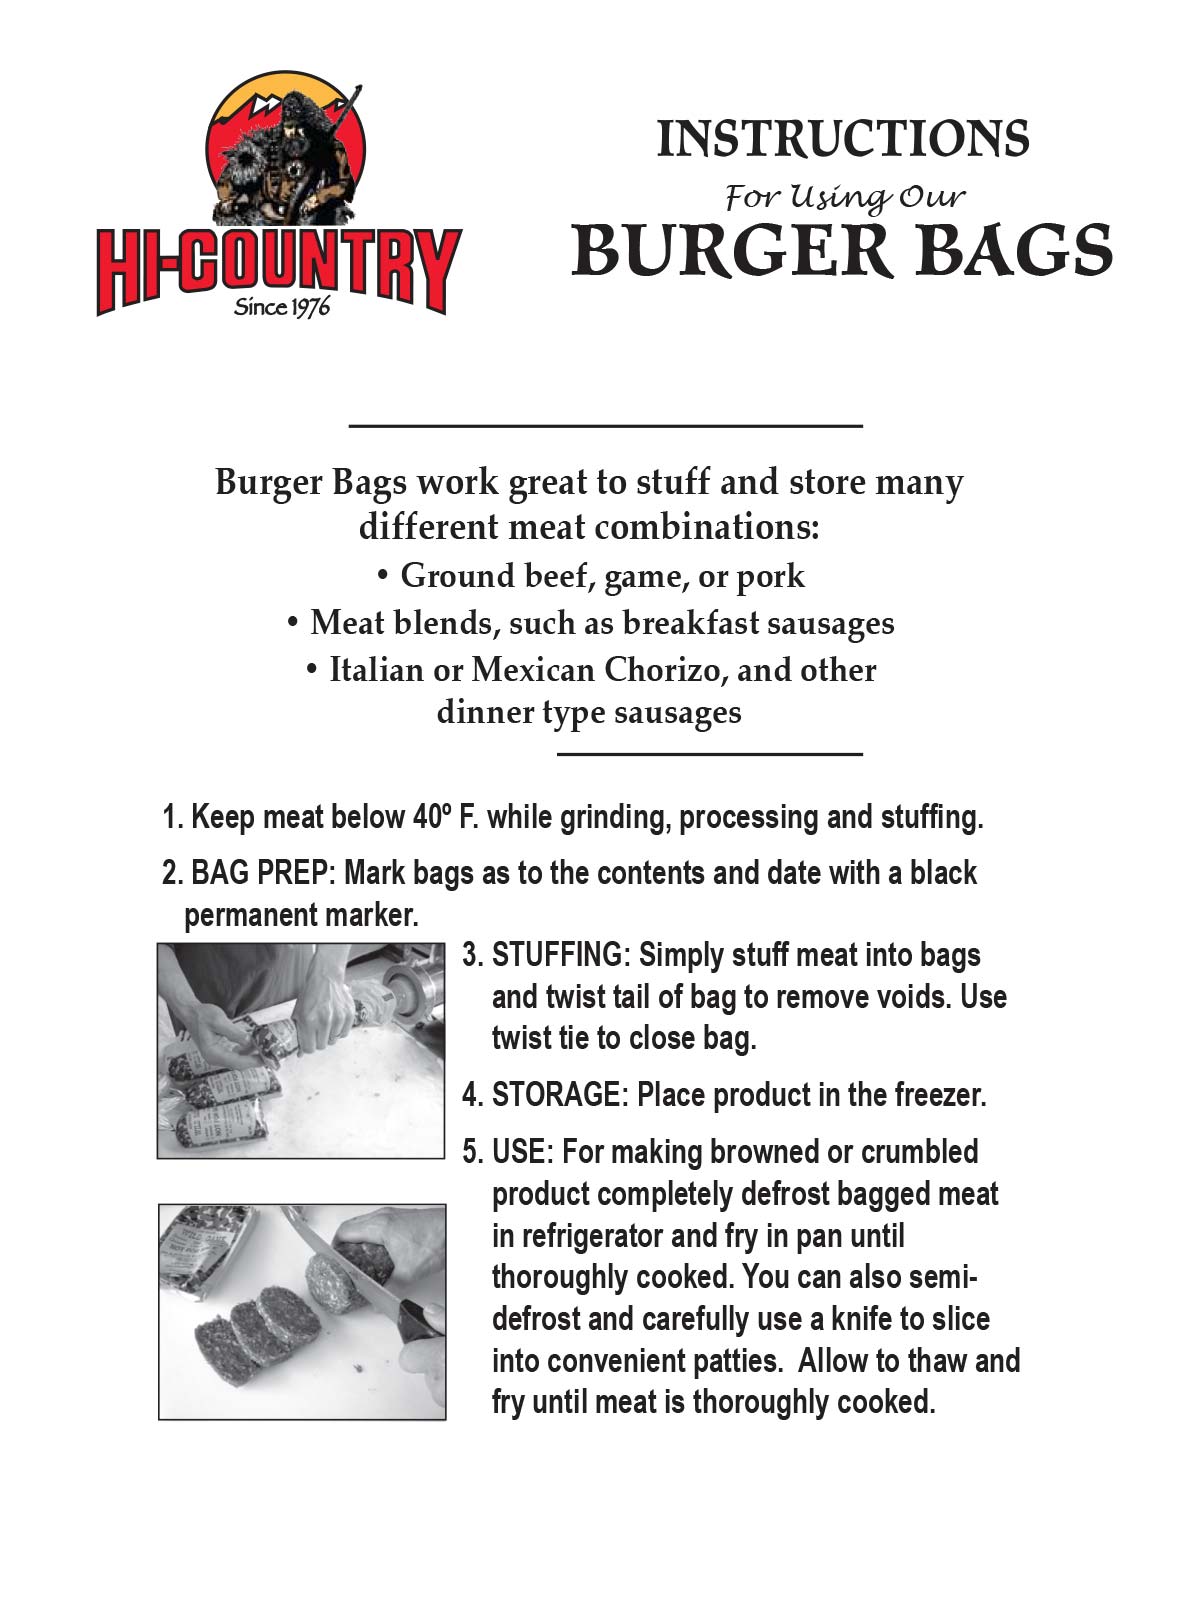 How to use Burger Bags for Wild Game Processing 